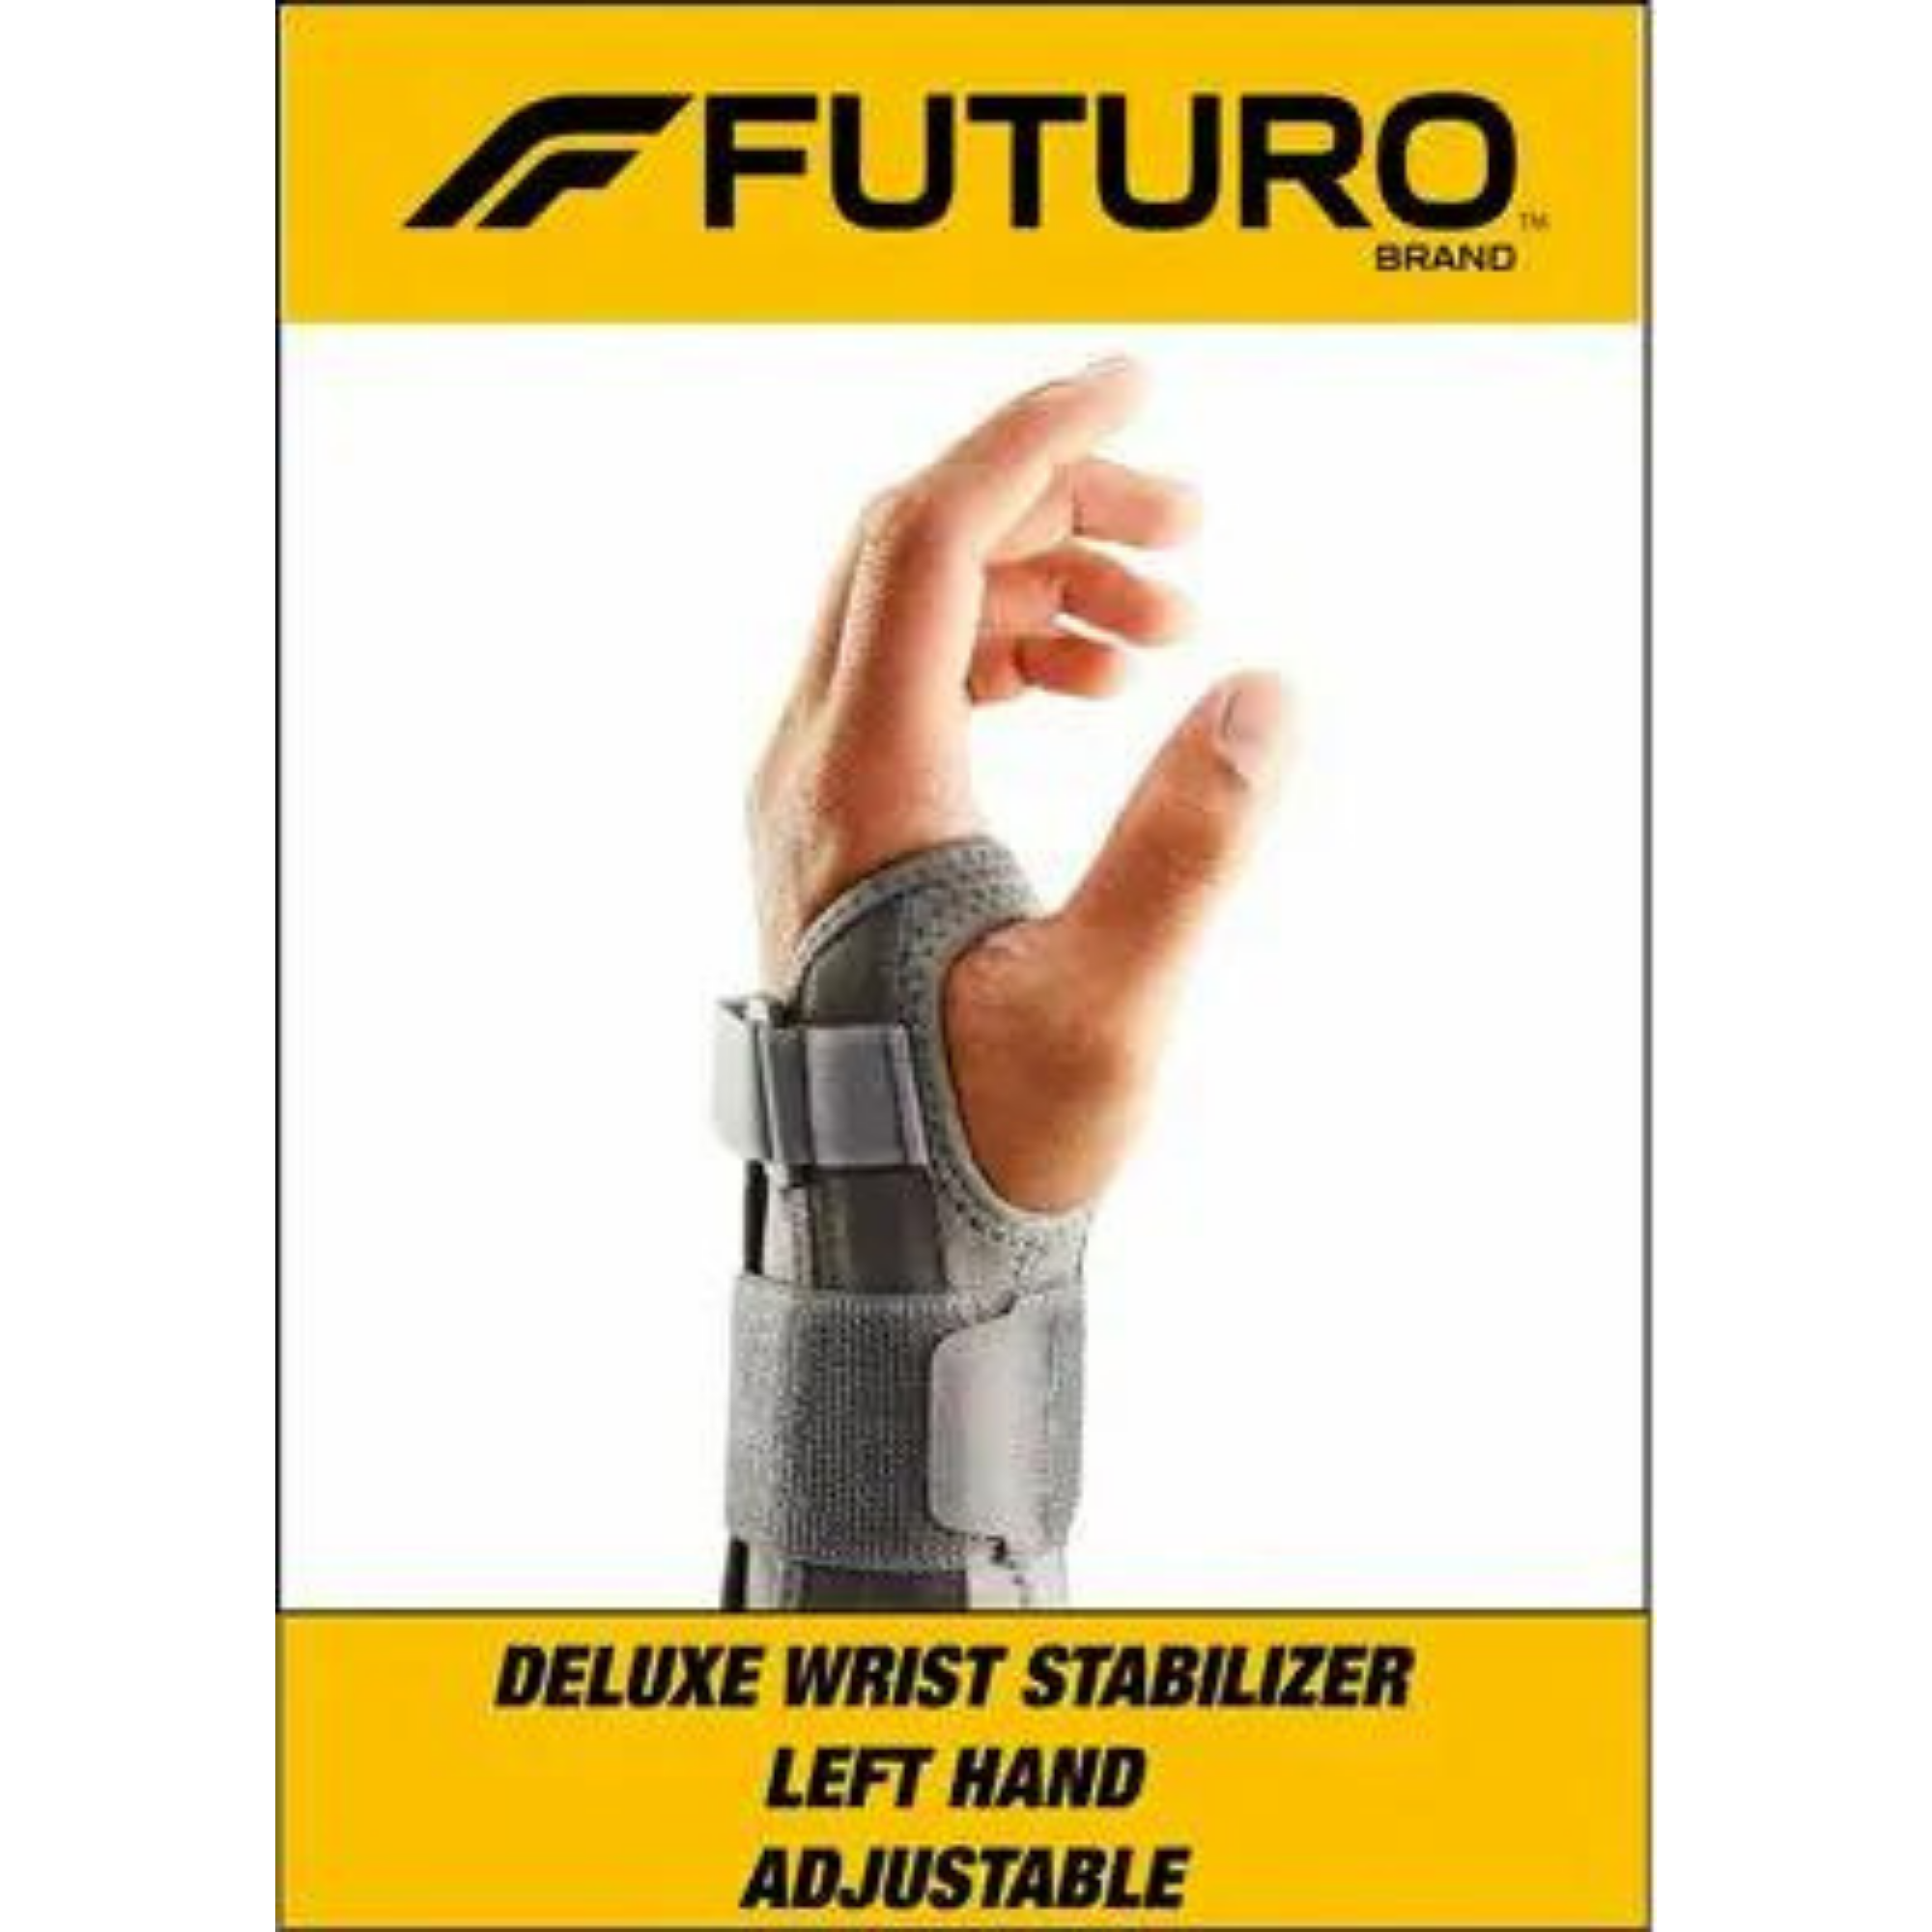 Futuro Deluxe Wrist Stabilizer Right Hand 09137ENT Large/X-Large